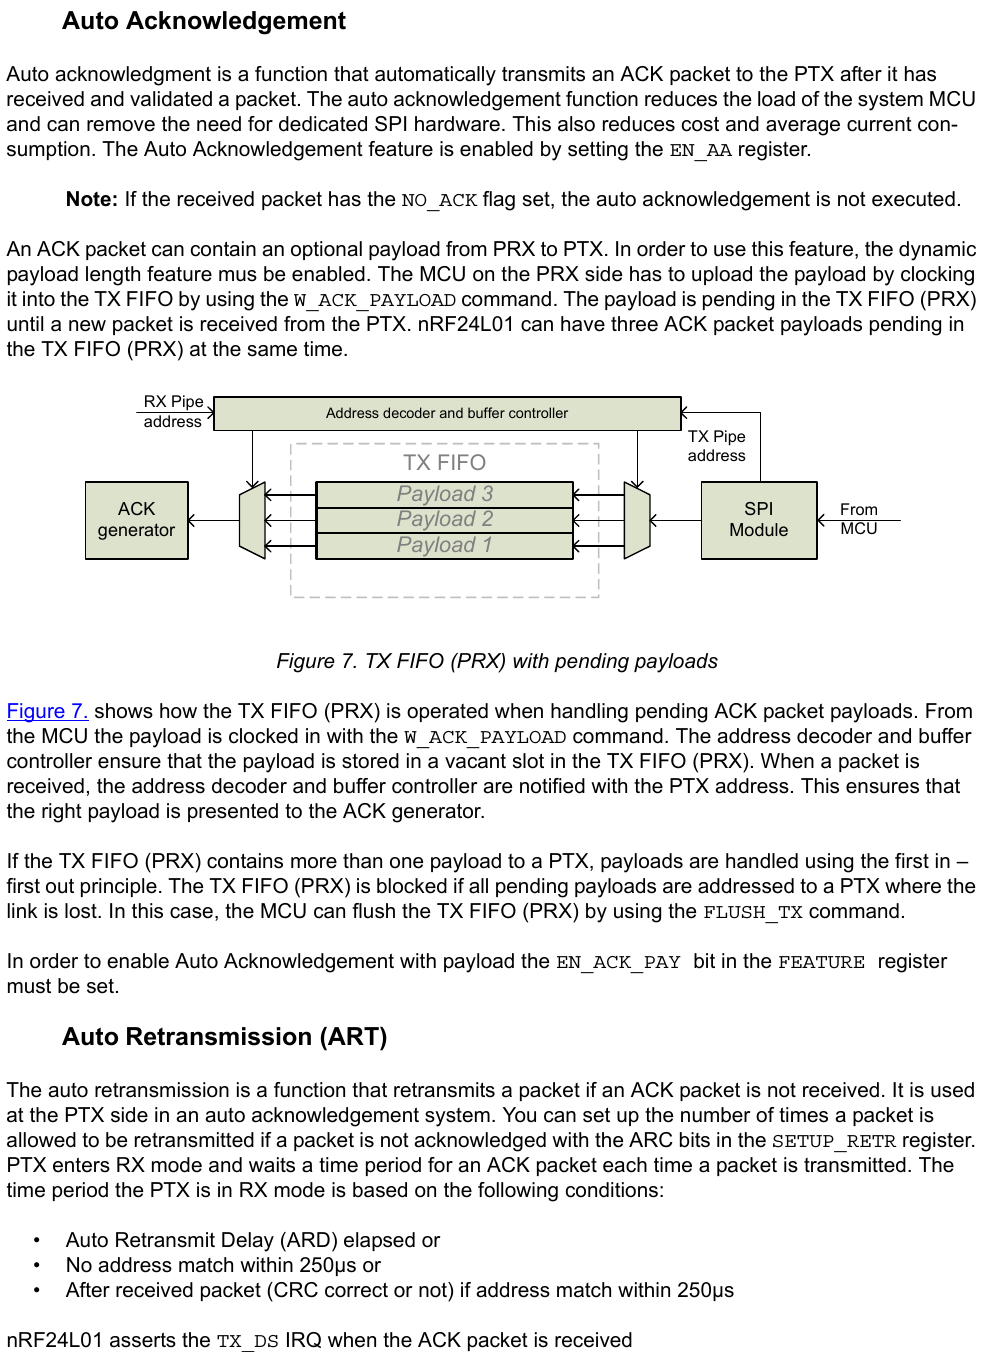         Auto AcknowledgementAuto acknowledgment is a function that automatically transmits an ACK packet to the PTX after it has received and validated a packet. The auto acknowledgement function reduces the load of the system MCU and can remove the need for dedicated SPI hardware. This also reduces cost and average current con-sumption. The Auto Acknowledgement feature is enabled by setting the EN_AA register.Note: If the received packet has the NO_ACK flag set, the auto acknowledgement is not executed.An ACK packet can contain an optional payload from PRX to PTX. In order to use this feature, the dynamic payload length feature mus be enabled. The MCU on the PRX side has to upload the payload by clocking it into the TX FIFO by using the W_ACK_PAYLOAD command. The payload is pending in the TX FIFO (PRX) until a new packet is received from the PTX. nRF24L01 can have three ACK packet payloads pending in the TX FIFO (PRX) at the same time.  Figure 7. TX FIFO (PRX) with pending payloadsFigure 7. shows how the TX FIFO (PRX) is operated when handling pending ACK packet payloads. From the MCU the payload is clocked in with the W_ACK_PAYLOAD command. The address decoder and buffer controller ensure that the payload is stored in a vacant slot in the TX FIFO (PRX). When a packet is received, the address decoder and buffer controller are notified with the PTX address. This ensures that the right payload is presented to the ACK generator.If the TX FIFO (PRX) contains more than one payload to a PTX, payloads are handled using the first in – first out principle. The TX FIFO (PRX) is blocked if all pending payloads are addressed to a PTX where the link is lost. In this case, the MCU can flush the TX FIFO (PRX) by using the FLUSH_TX command.In order to enable Auto Acknowledgement with payload the EN_ACK_PAY bit in the FEATURE register must be set.        Auto Retransmission (ART)The auto retransmission is a function that retransmits a packet if an ACK packet is not received. It is used at the PTX side in an auto acknowledgement system. You can set up the number of times a packet is allowed to be retransmitted if a packet is not acknowledged with the ARC bits in the SETUP_RETR register. PTX enters RX mode and waits a time period for an ACK packet each time a packet is transmitted. The time period the PTX is in RX mode is based on the following conditions:• Auto Retransmit Delay (ARD) elapsed or• No address match within 250µs or• After received packet (CRC correct or not) if address match within 250µsnRF24L01 asserts the TX_DS IRQ when the ACK packet is receivedTX FIFOPayload 1Payload 2Payload 3Address decoder and buffer controllerSPIModuleACKgeneratorRX Pipe address TX Pipe addressFromMCU